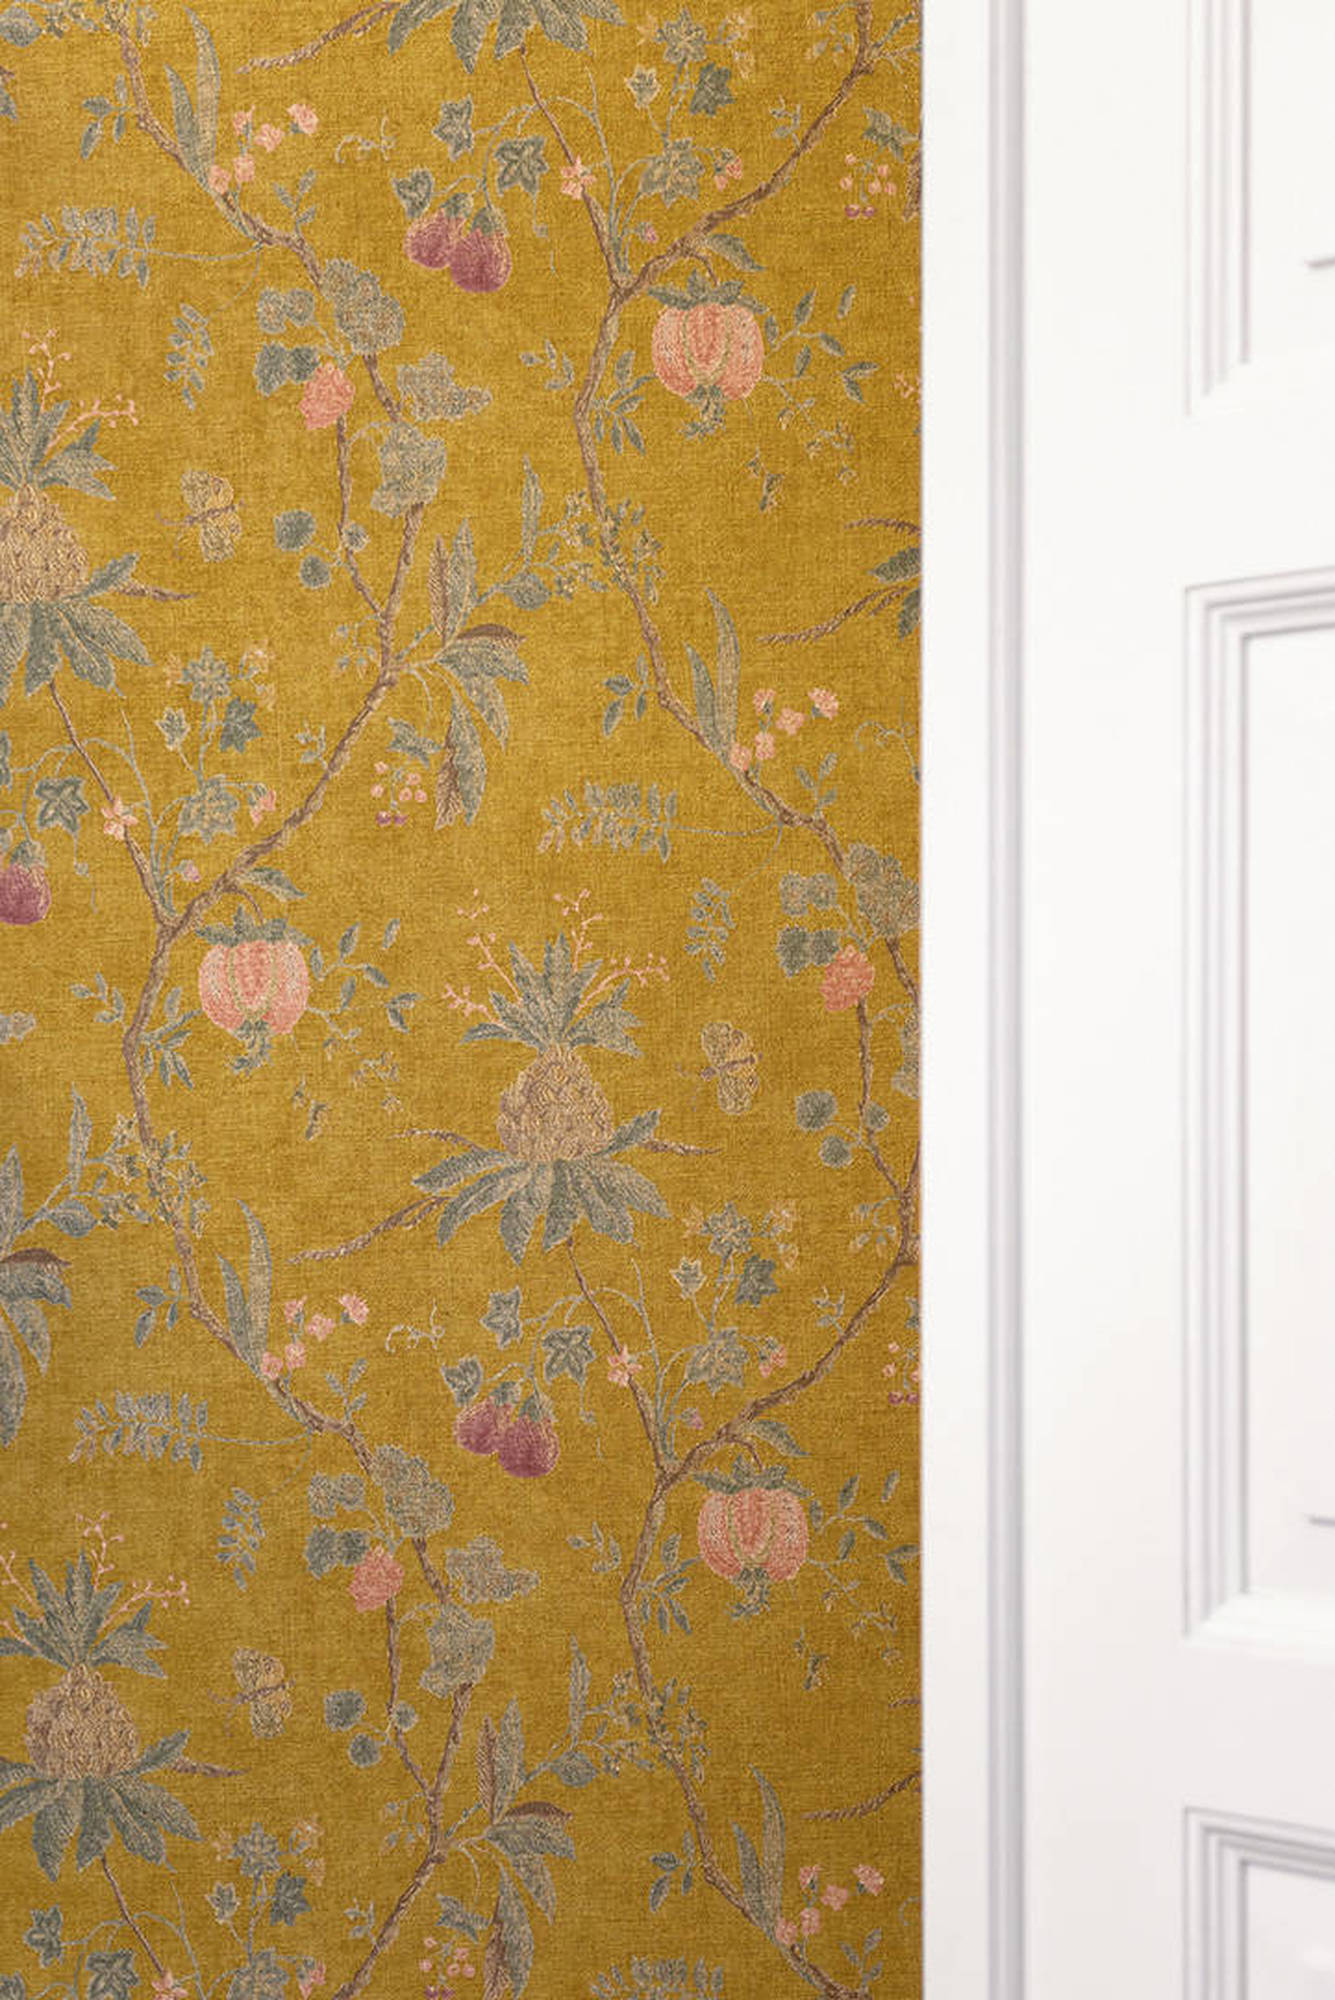 Baum - Vintage Yellow - Vintage Chinoiserie , HD Wallpaper & Backgrounds